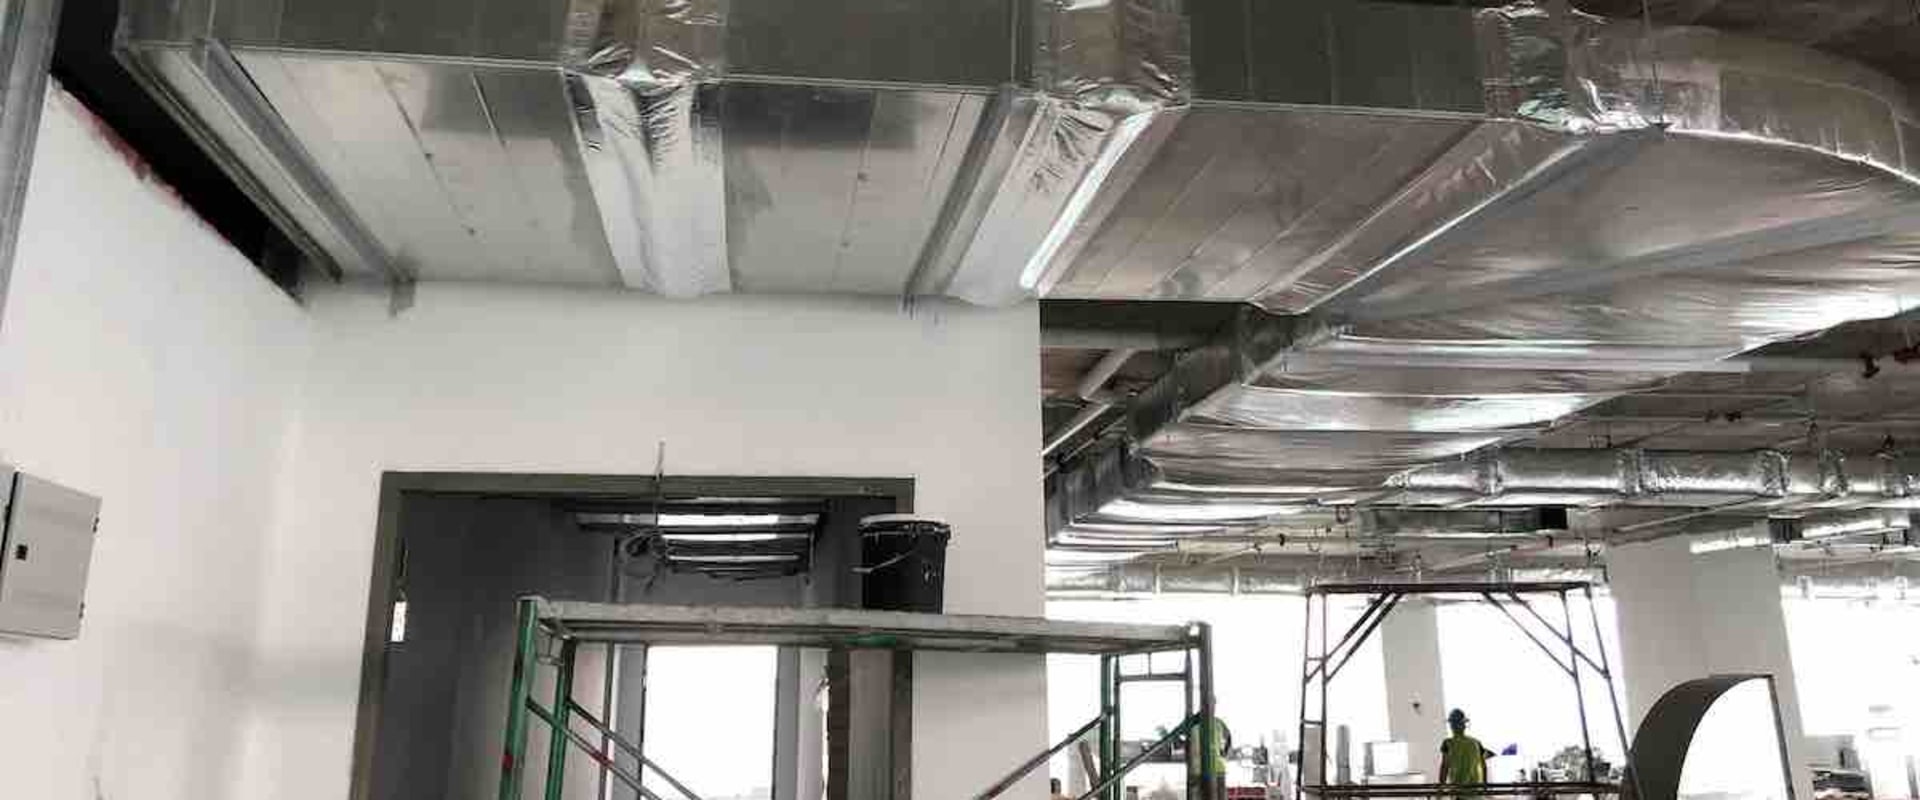 Flex Ducts vs Hard Ducts: Which is the Best Choice?